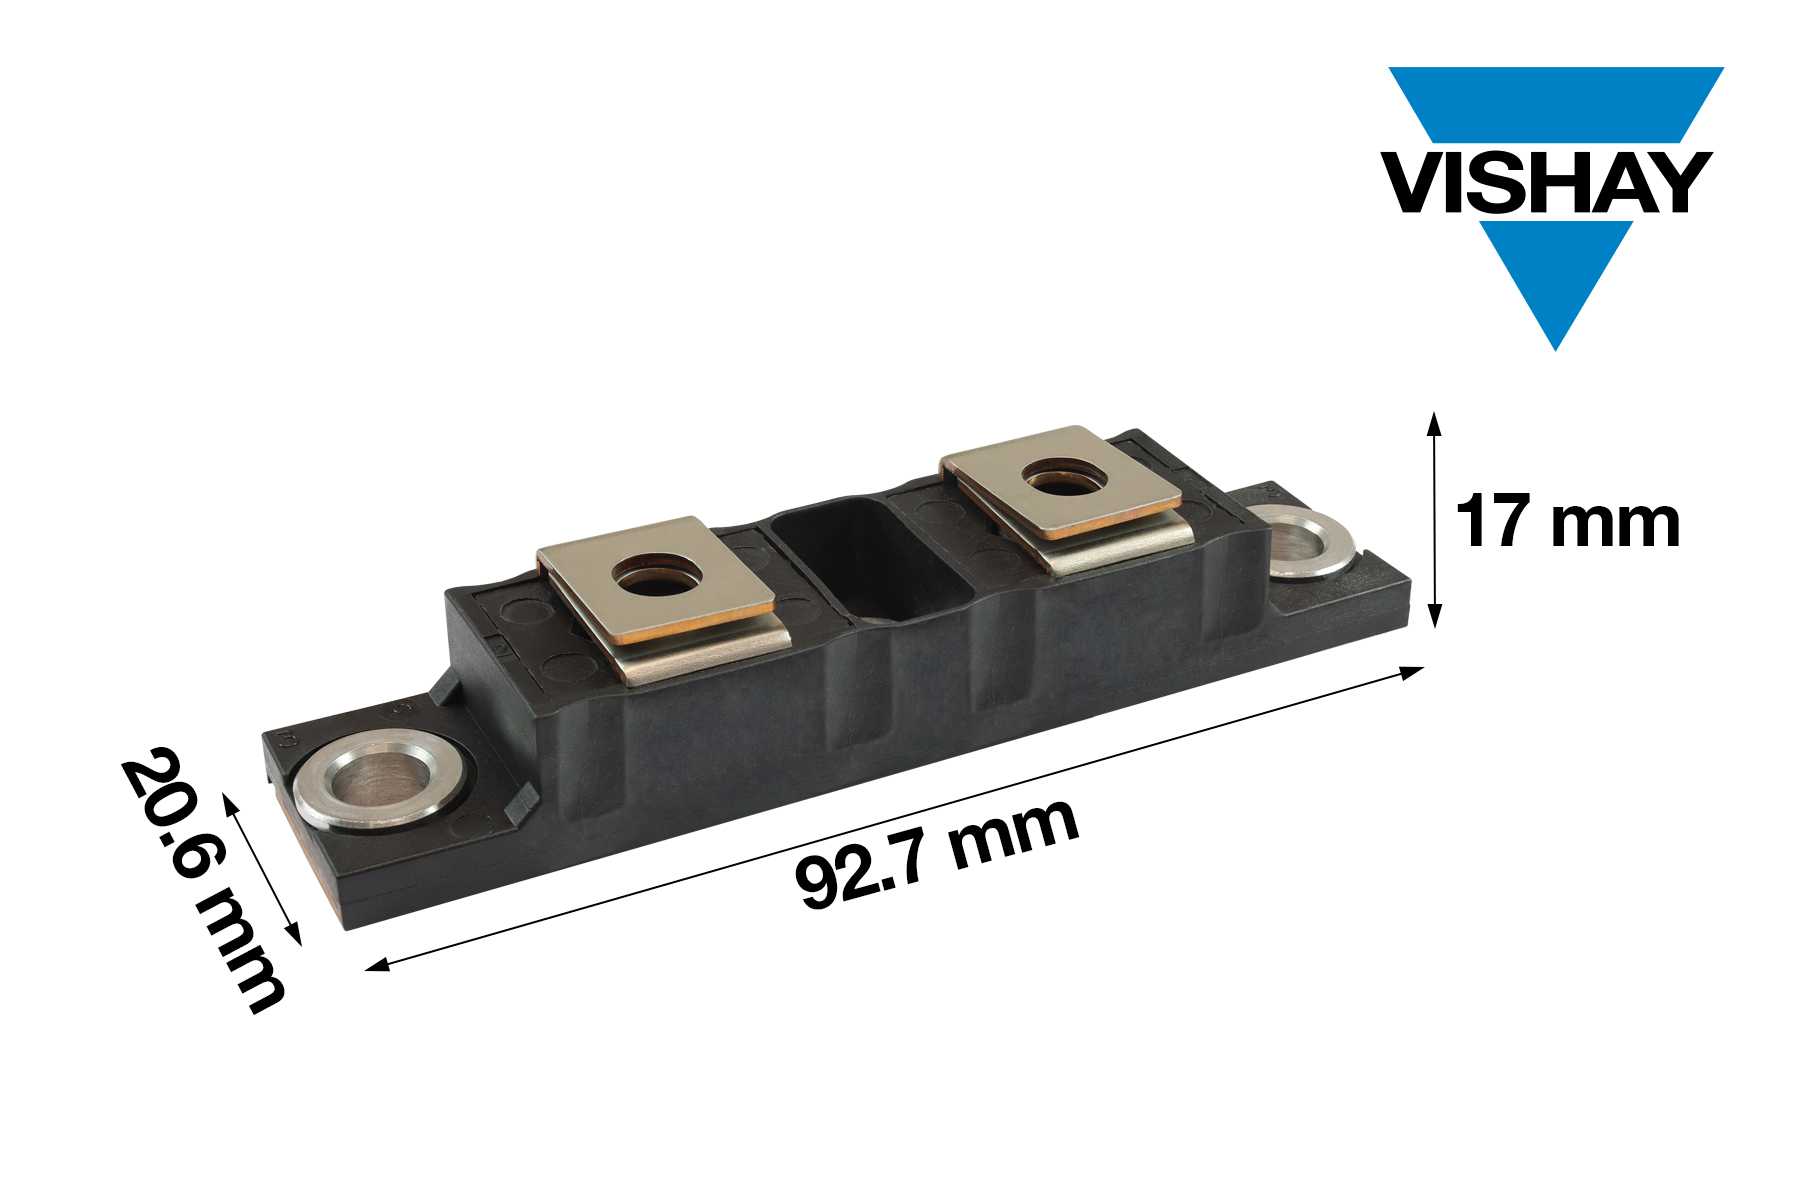 Vishay Intertechnology FRED Pt 500 A Ultrafast Soft Recovery Diode Modules in the New TO-244 Gen III Package Deliver High Reliability